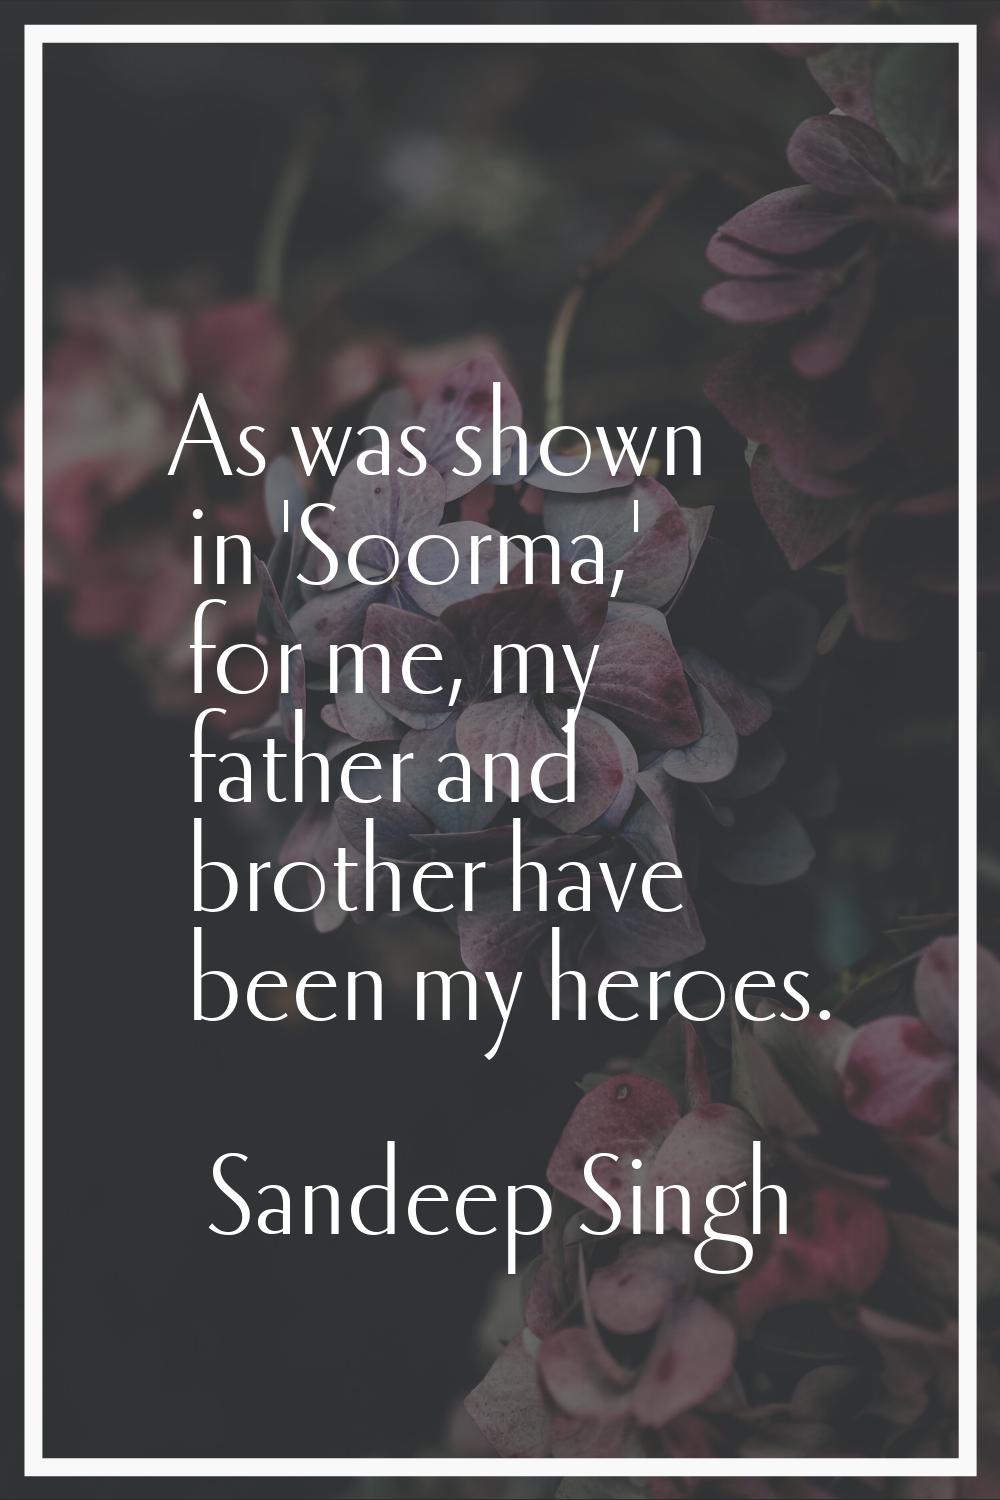 As was shown in 'Soorma,' for me, my father and brother have been my heroes.